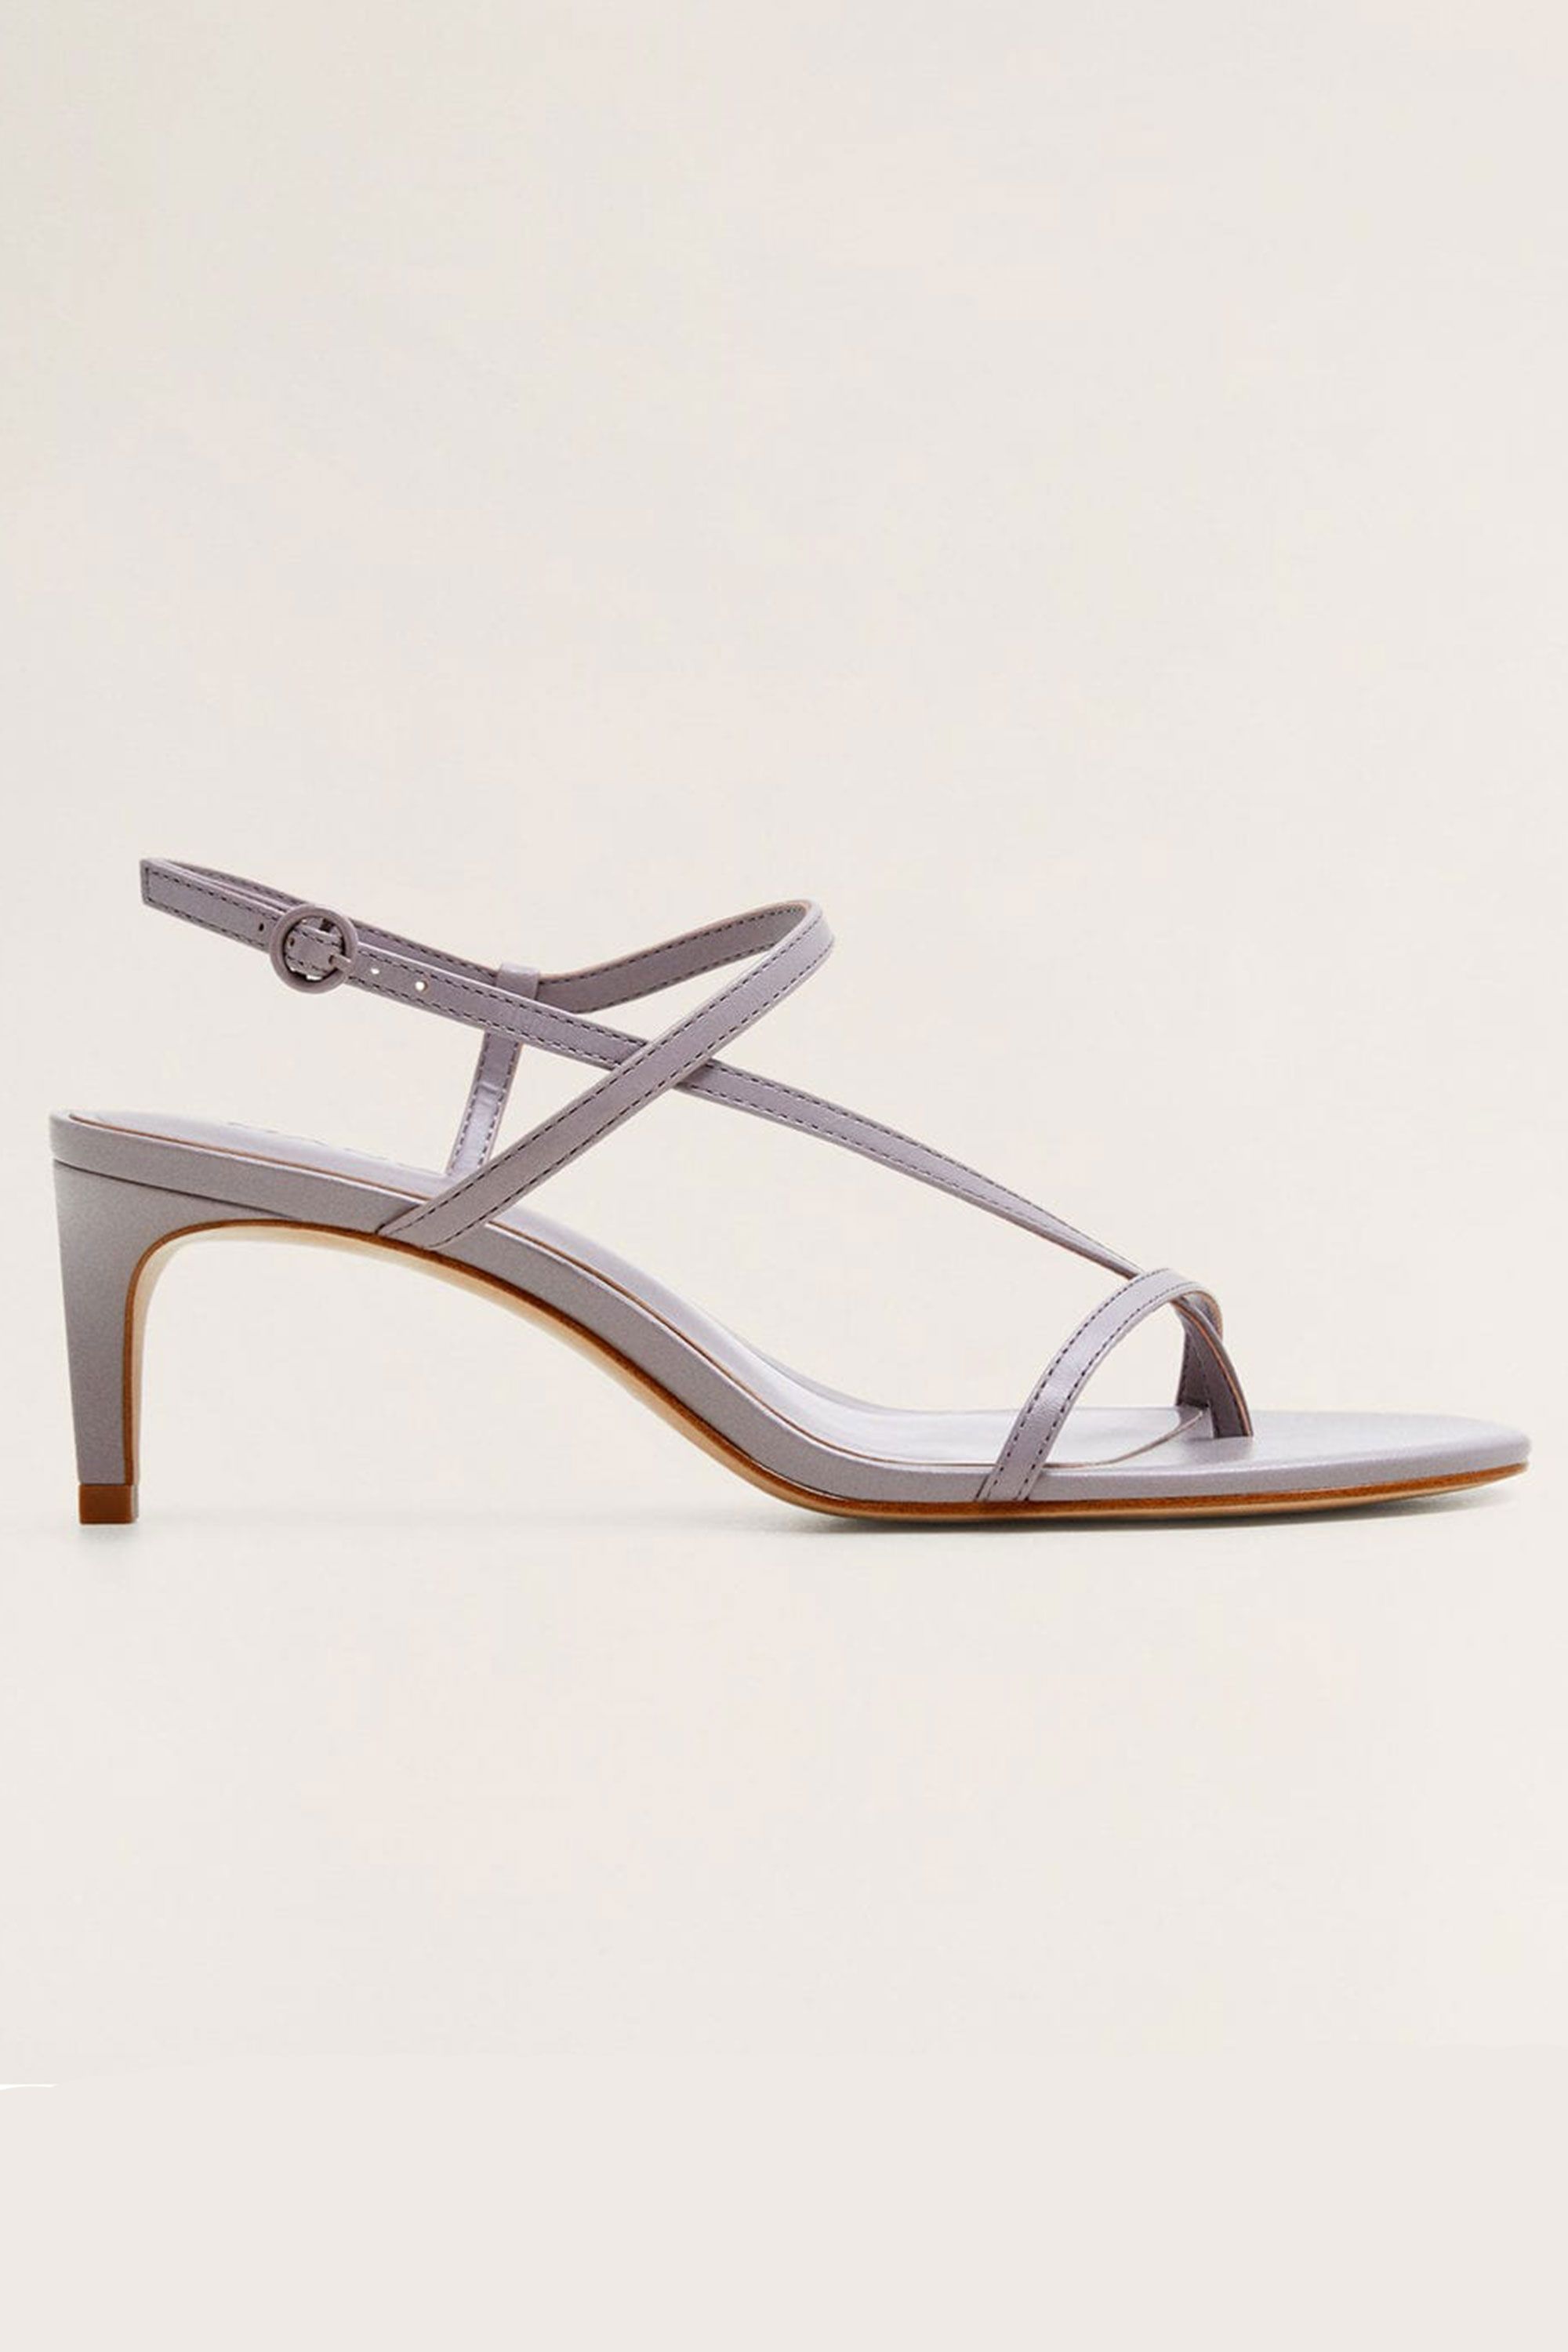 Barely-there strappy sandals to get you 